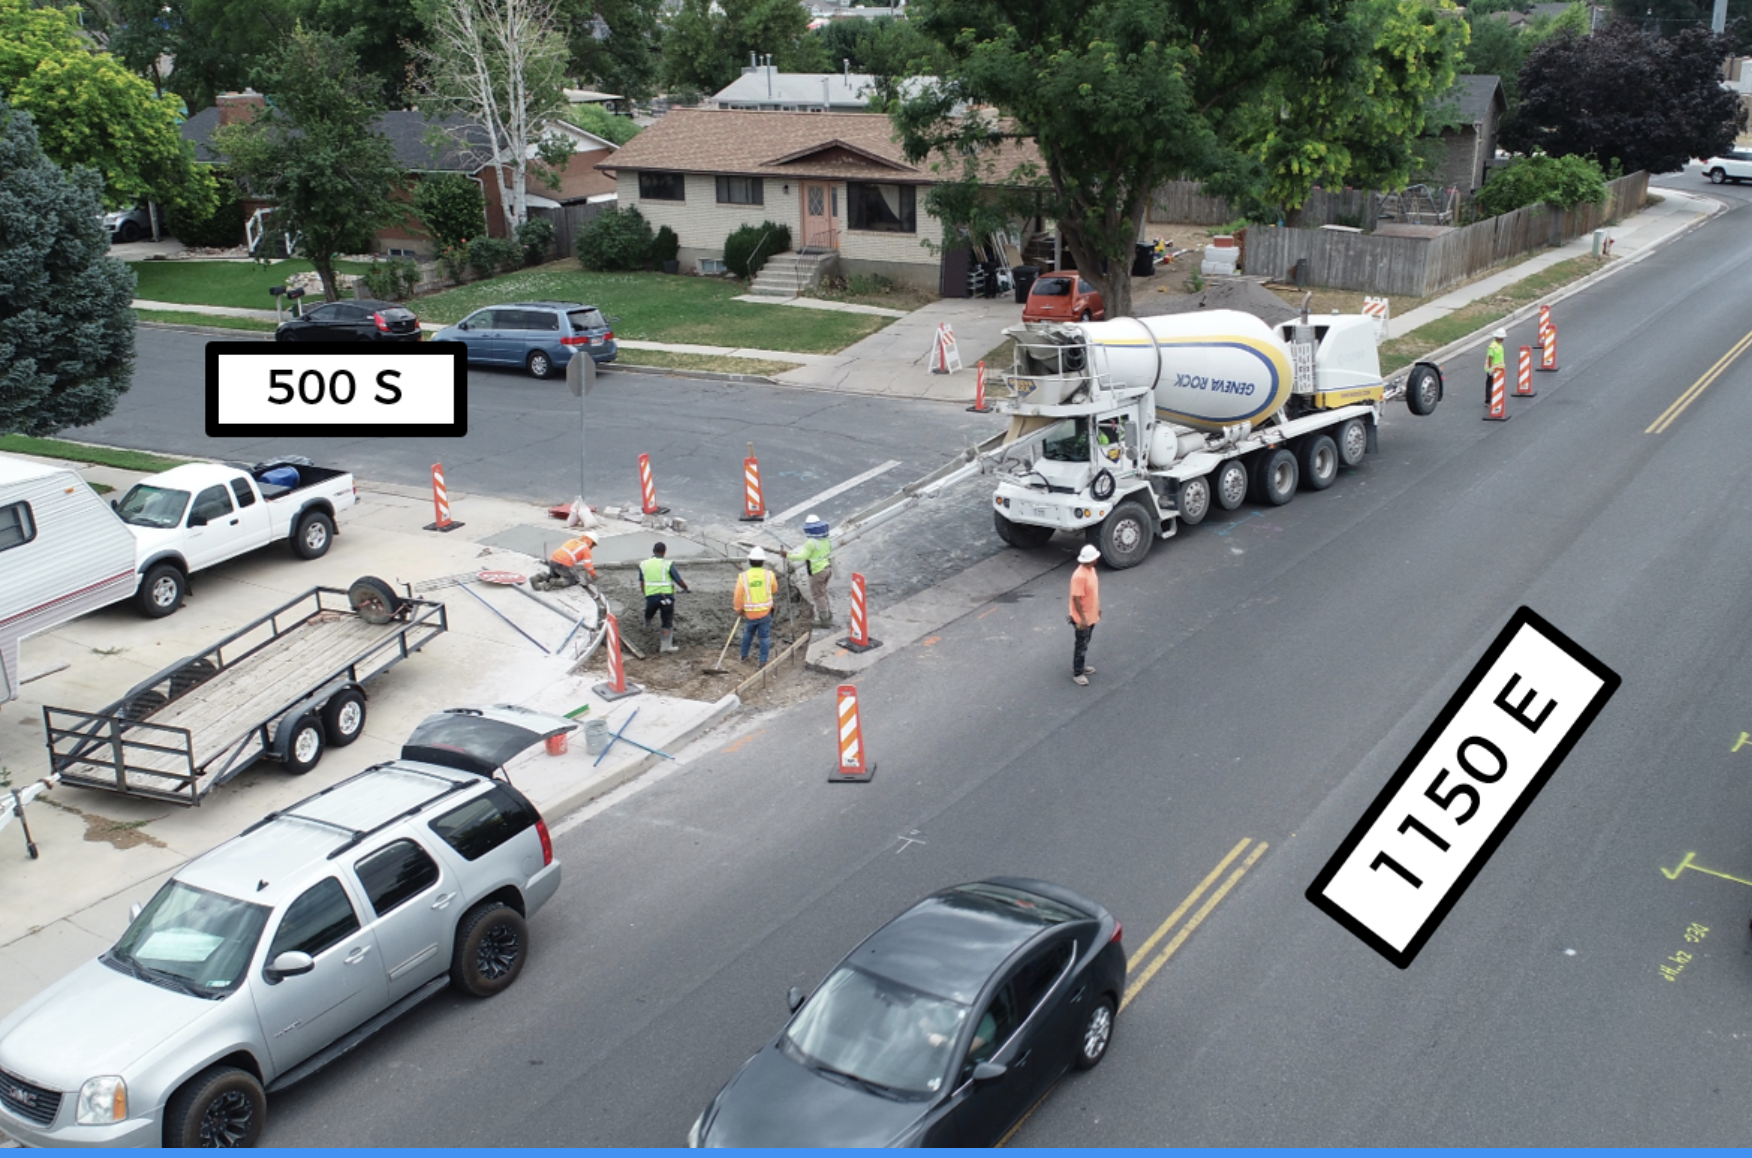 Image showing crews pouring cement to create an ADA ramp at 500 S 1150 E